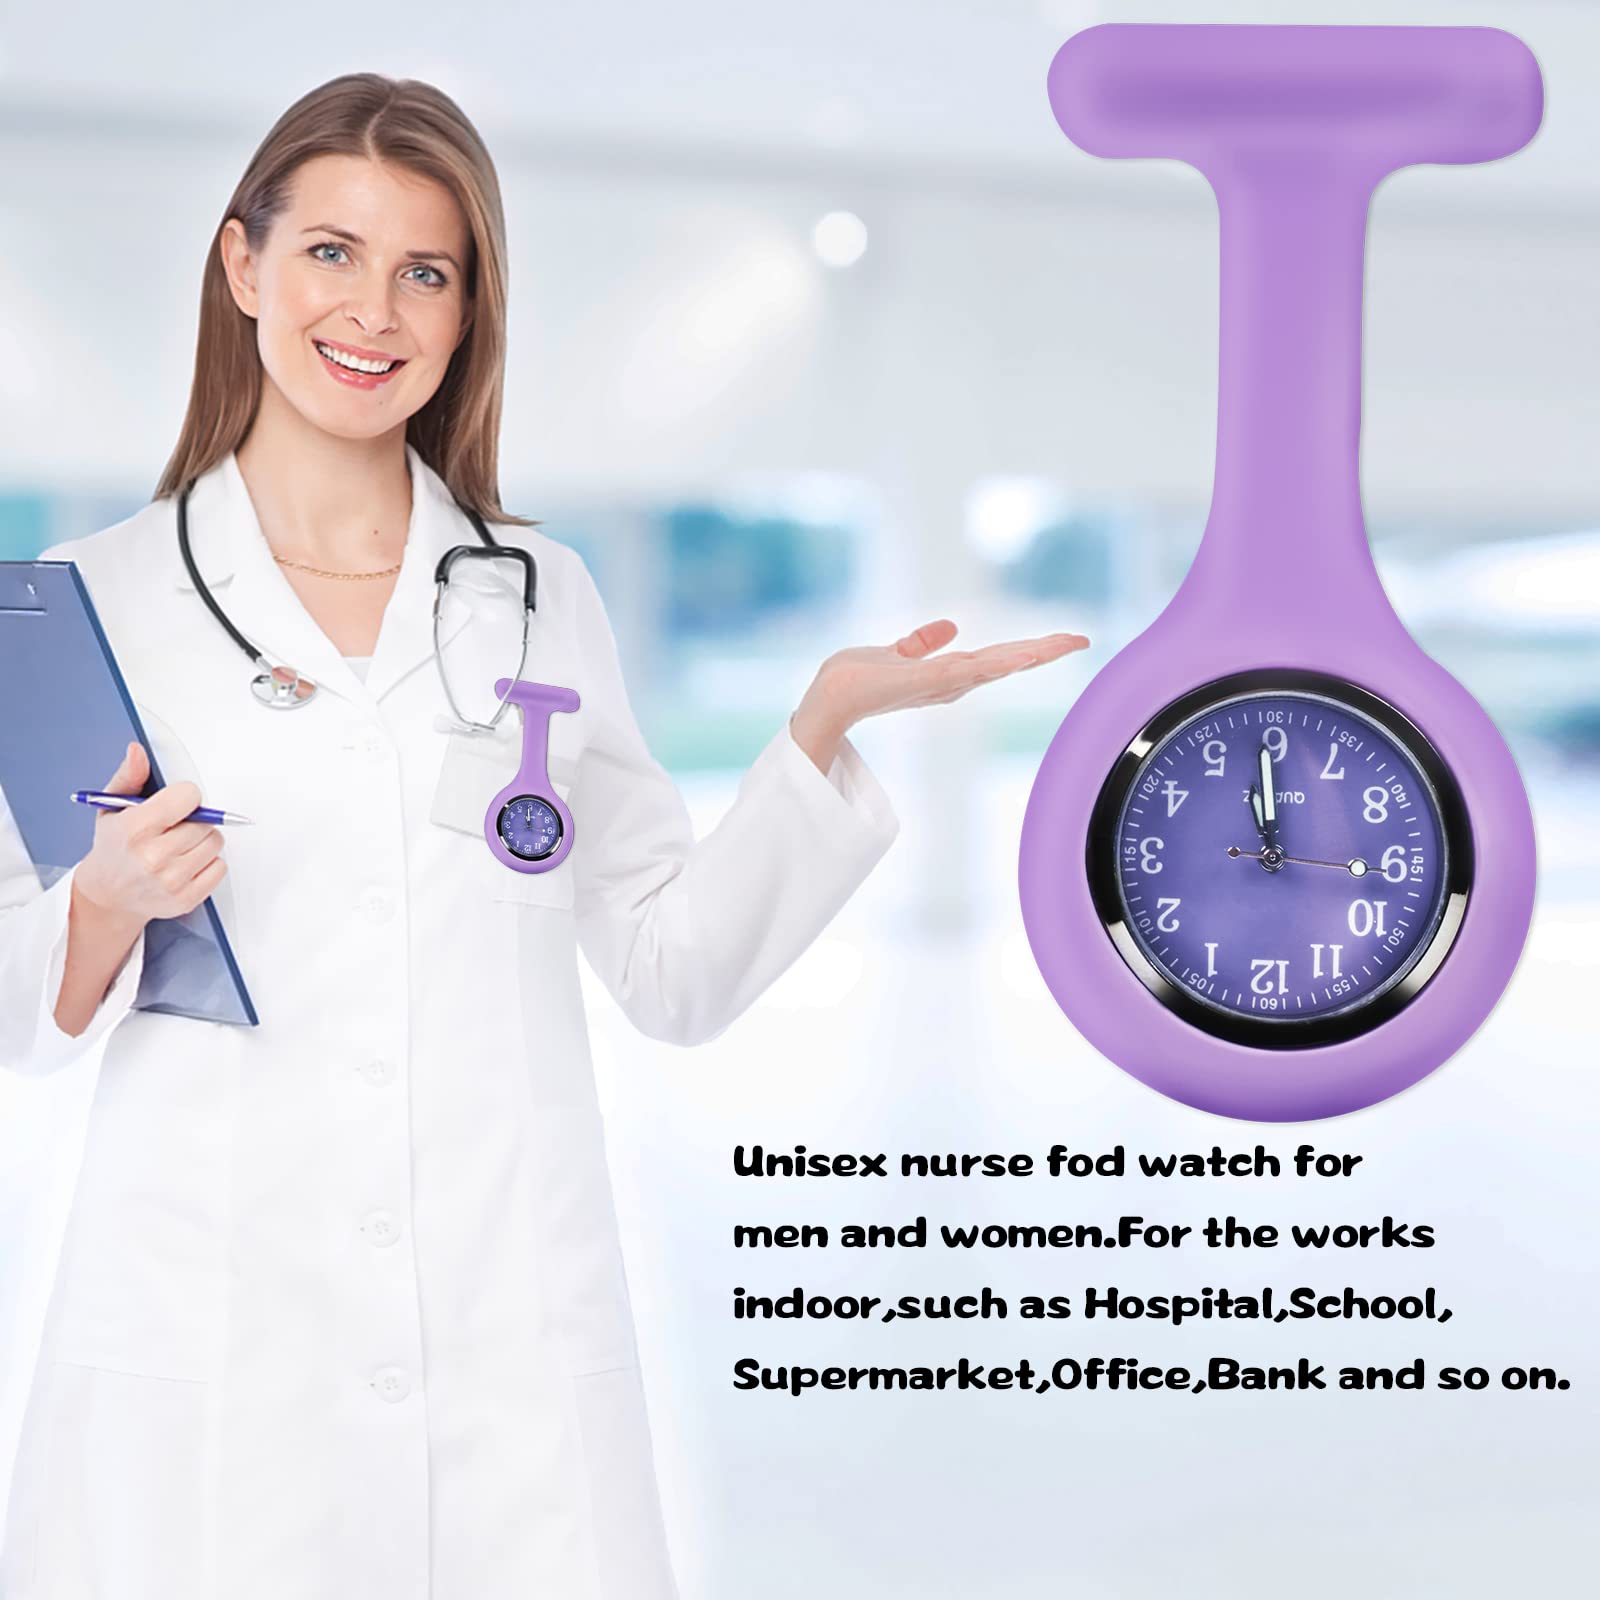 SibyTech Nurse Watch Brooch, Silicone with Pin/Clip, Control Design, Health Care Nurse Doctor Paramedic Medical Brooch Fob Watch,Purple White and Pink